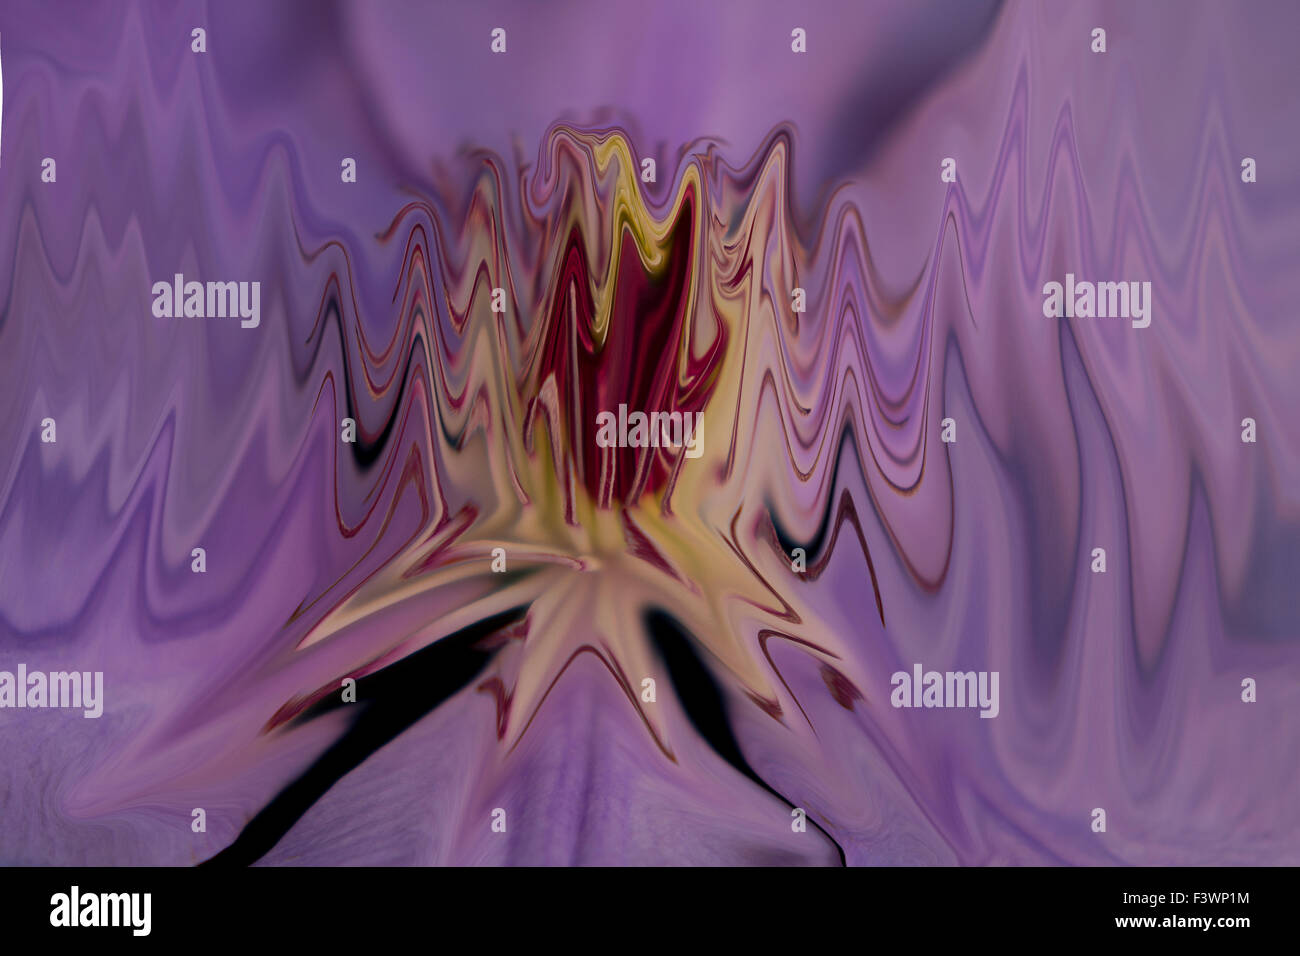 Abstract clematis image, manipulated digital photograph Stock Photo